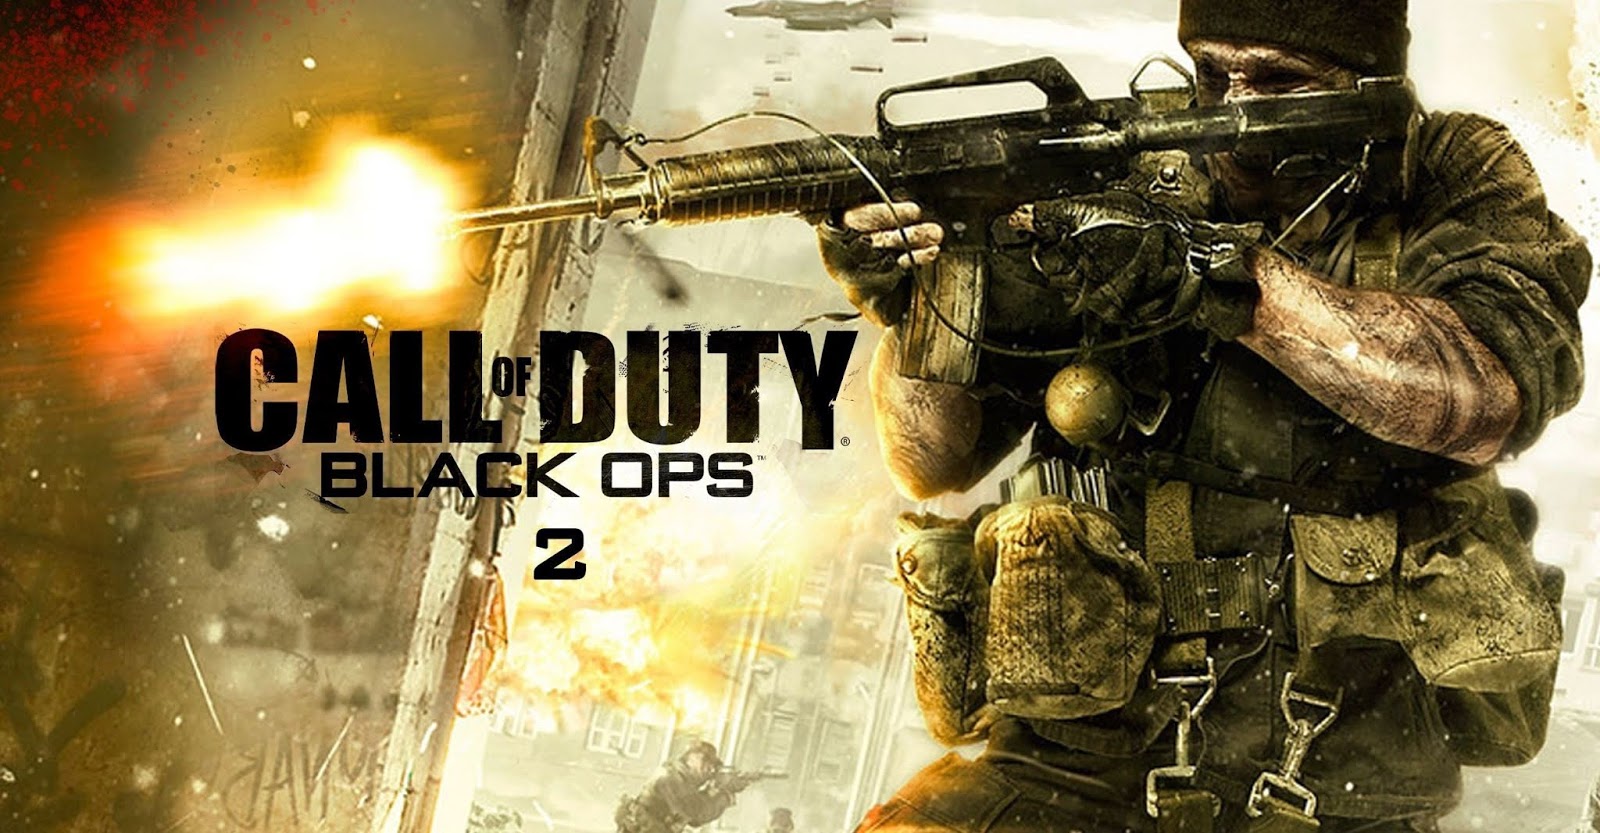 Call of duty black ops zombies download